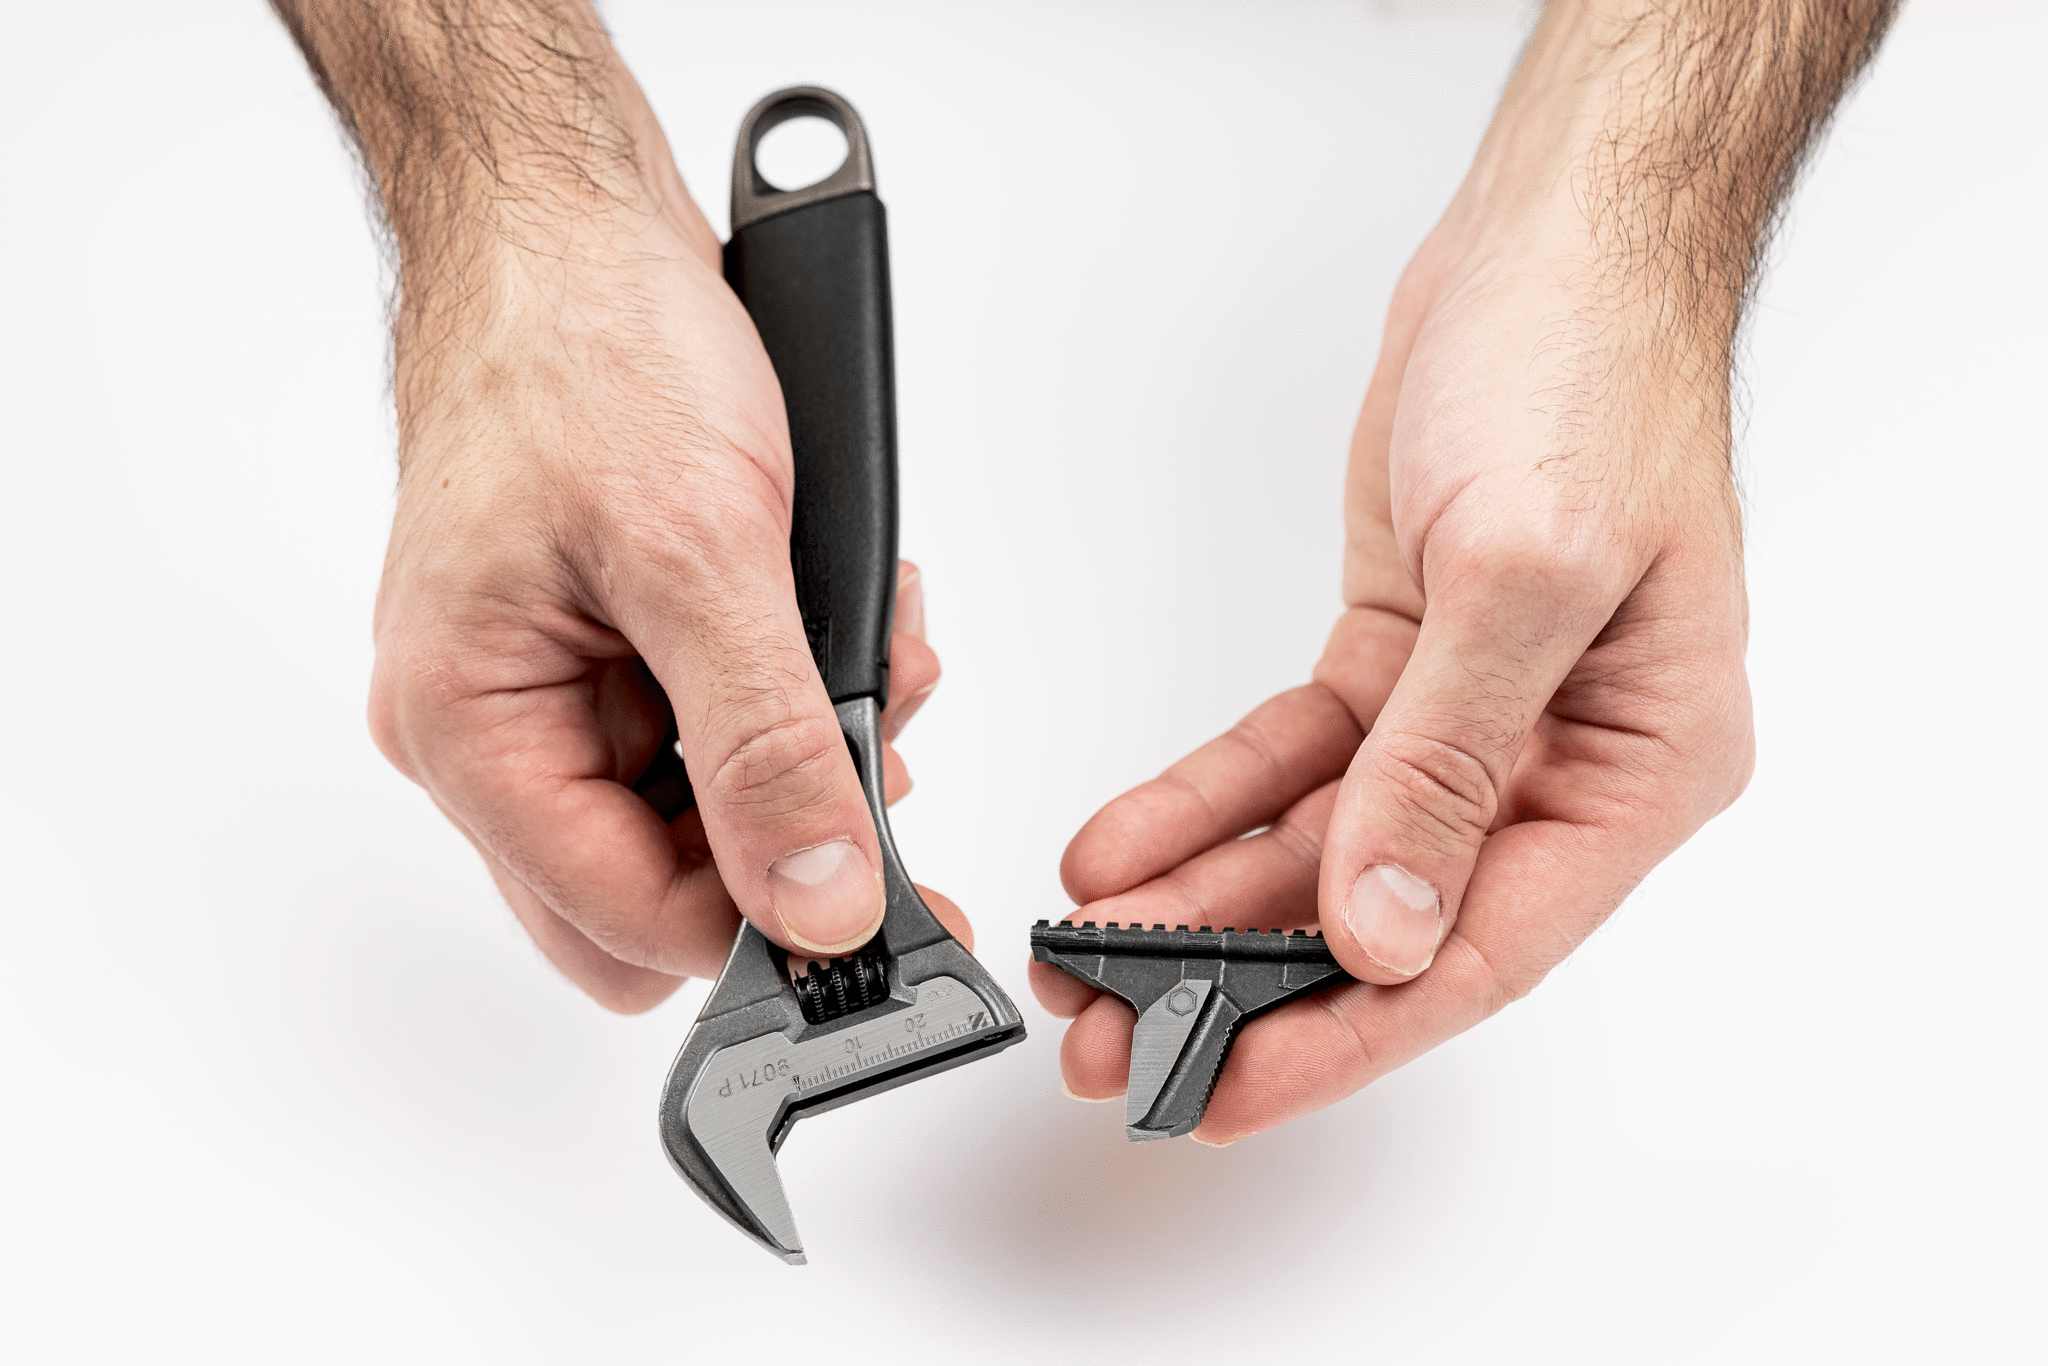 ERGO™ rubber handle central nut phosphated adjustable wrench, with reversible jaw - 9073P by Bahco